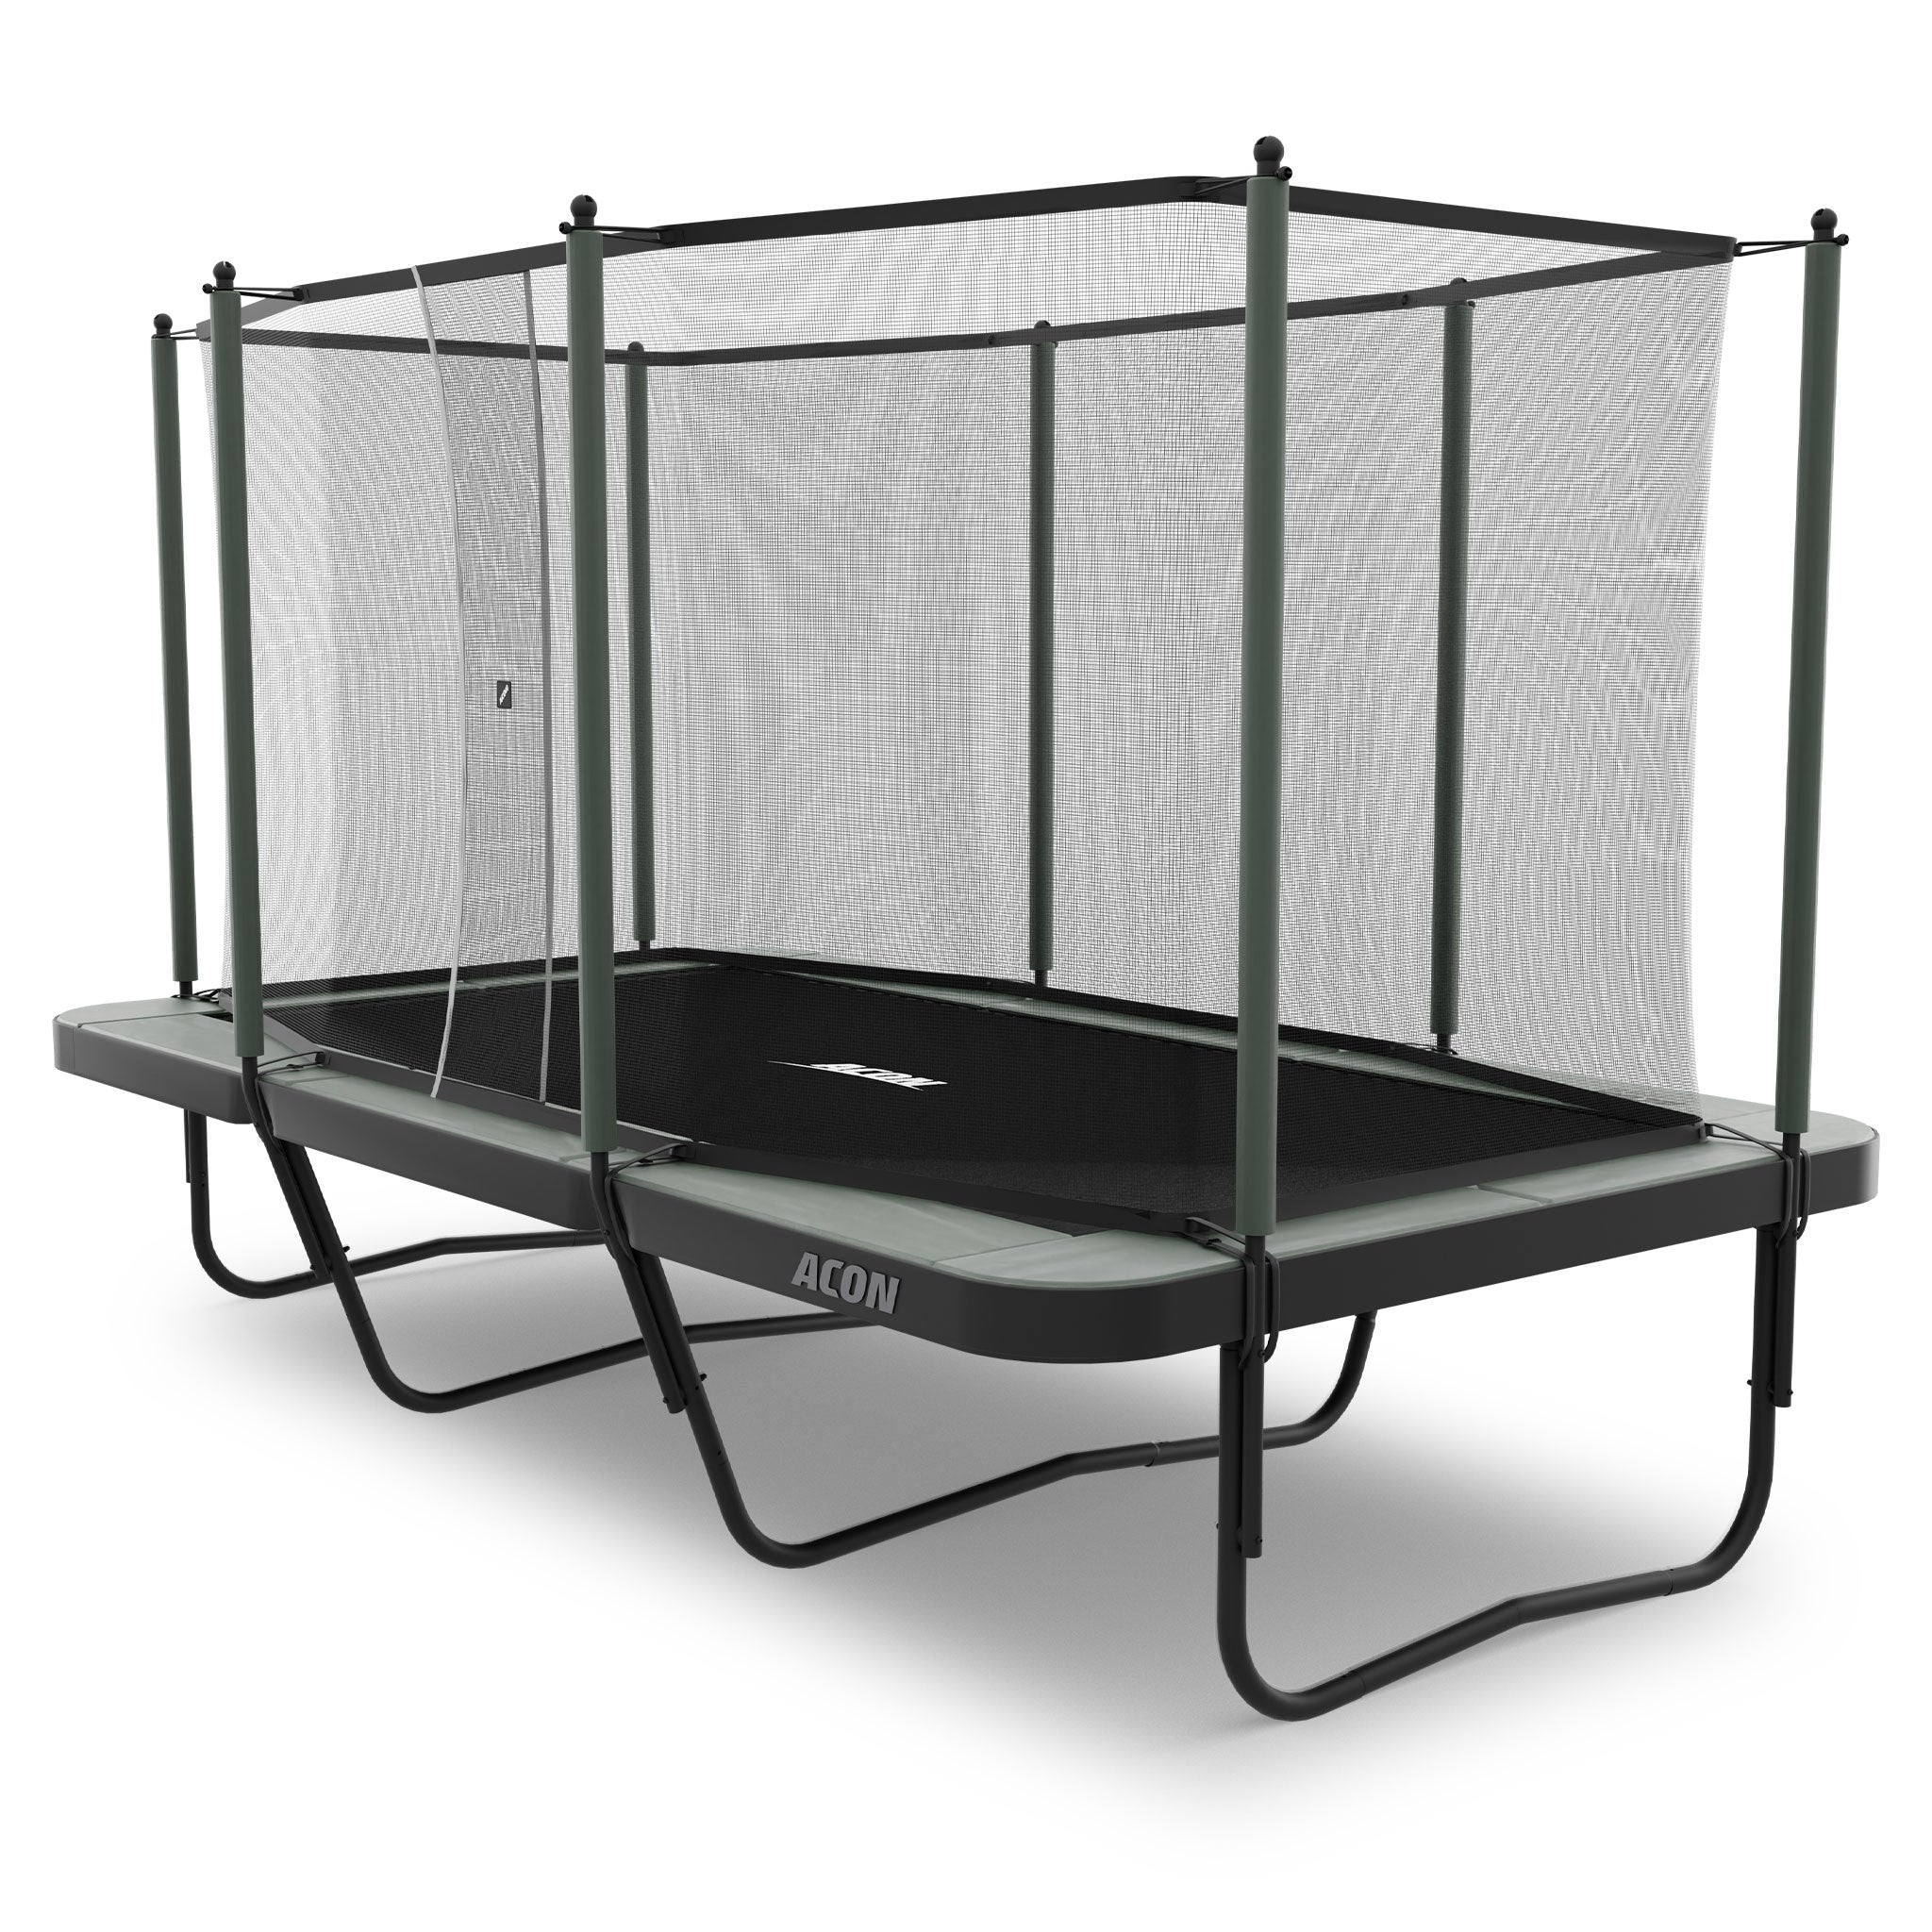 ACON 16 HD Trampoline with enclosure on a white background